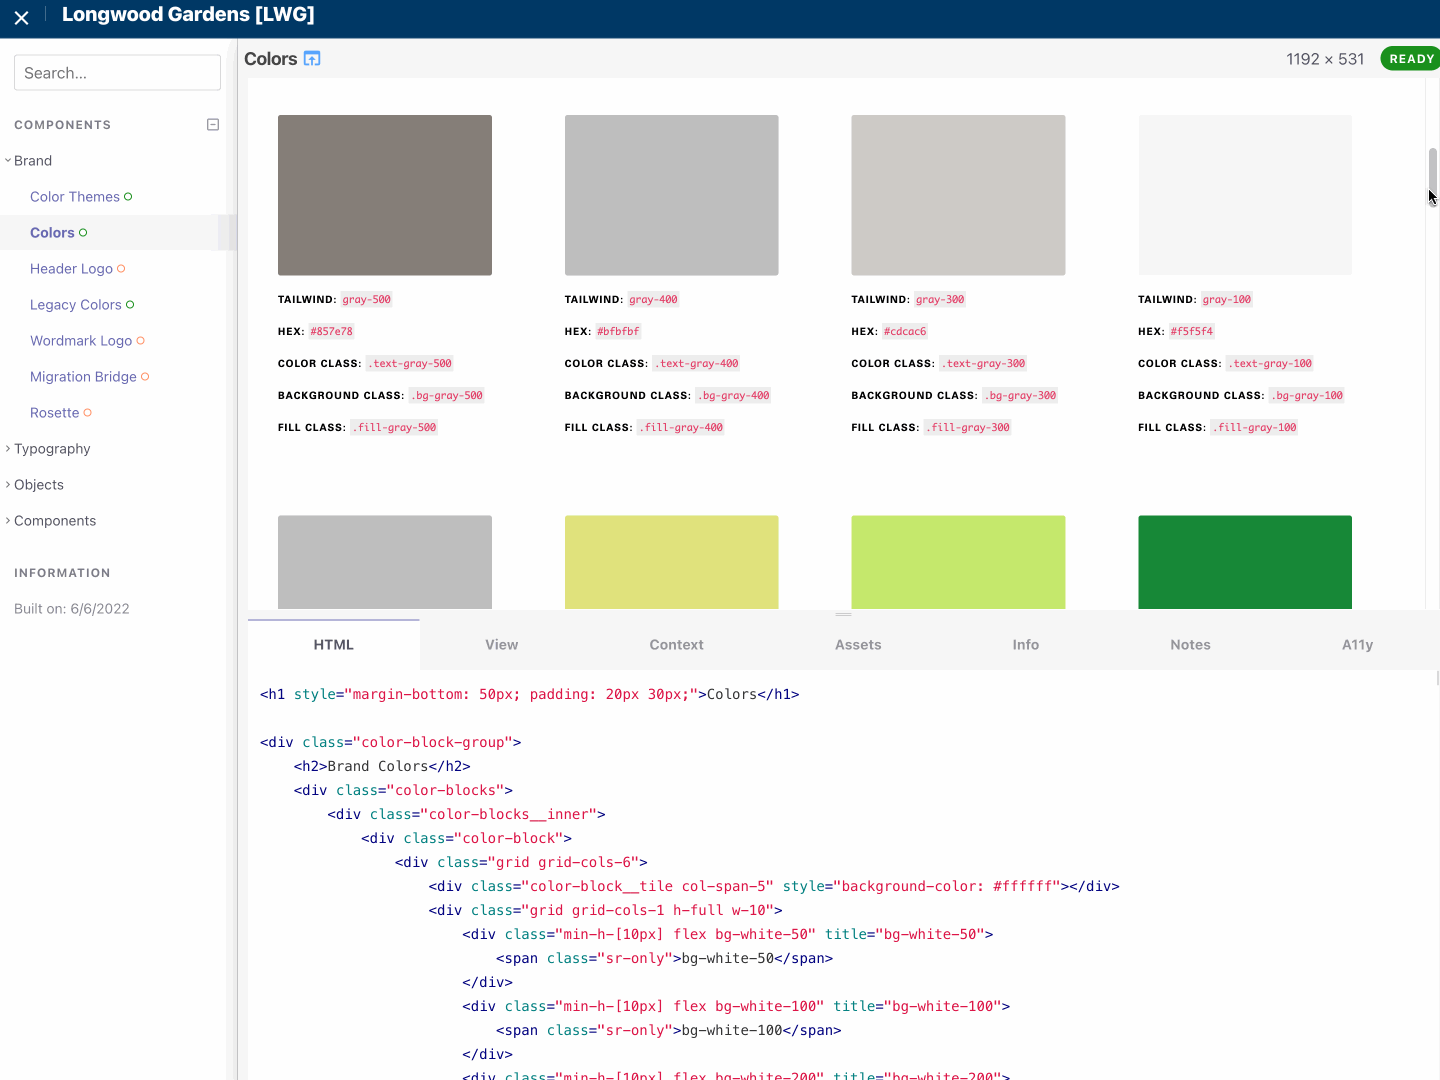 A screen shot of the component library and the color contrast information